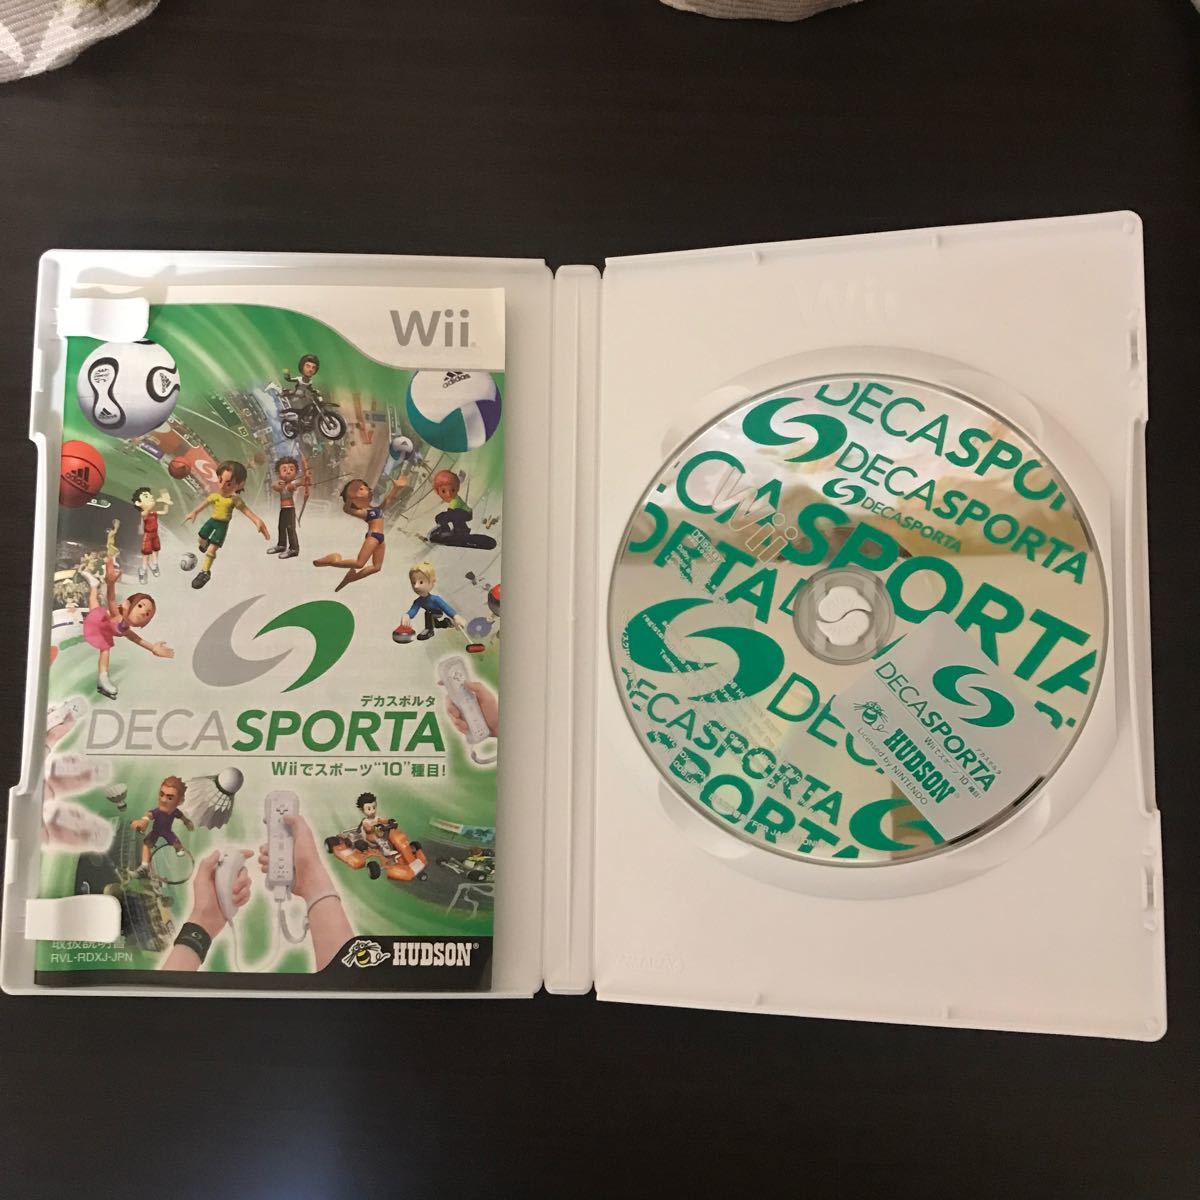 Wiiソフト　 Wiiスポーツ＆デカスポルタ　2本セット